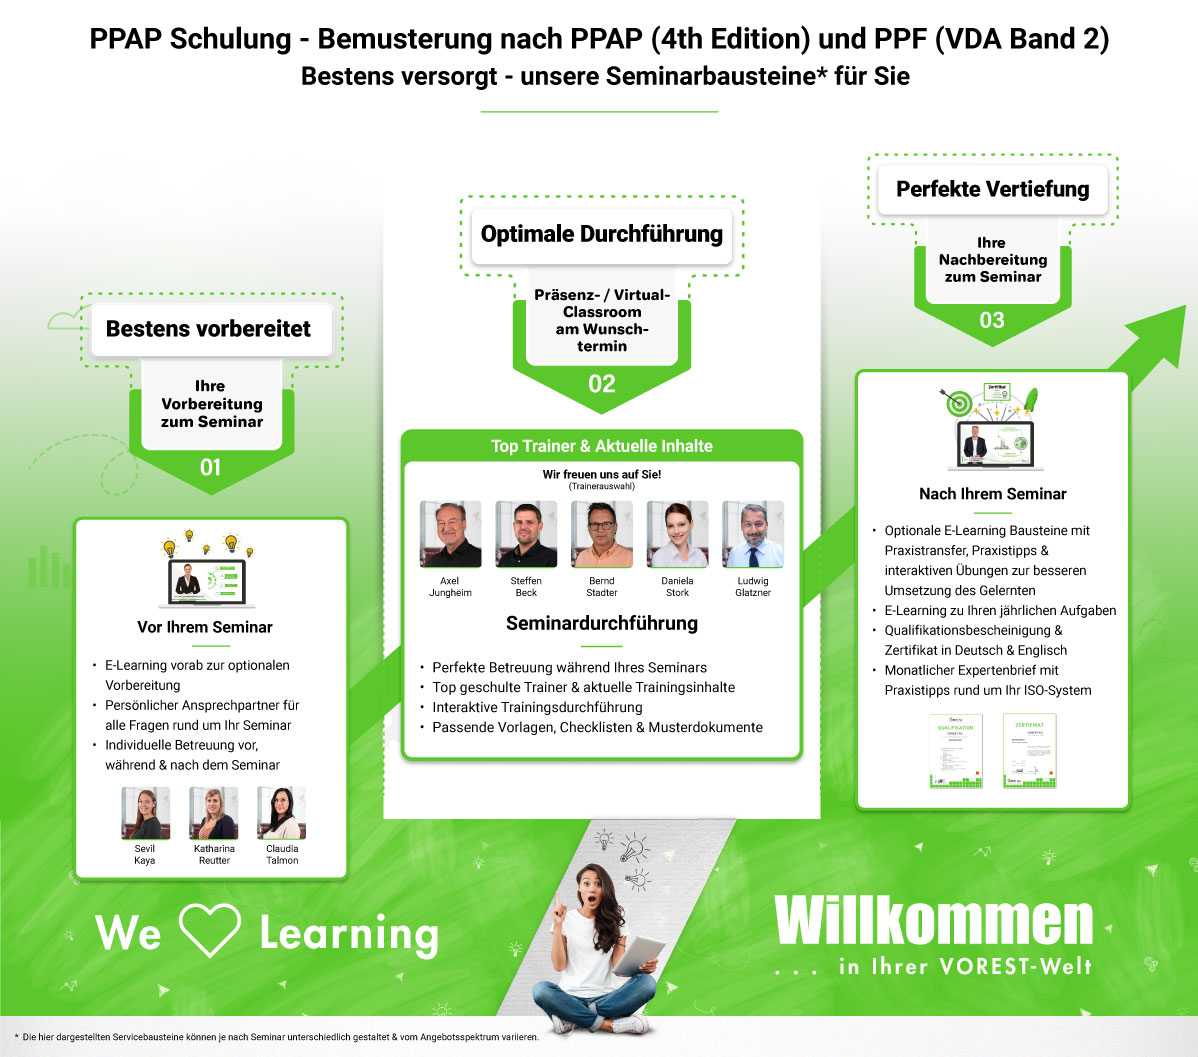 PPAP Schulung - Bemusterung nach PPAP (4th Edition) und PPF (VDA Band 2)